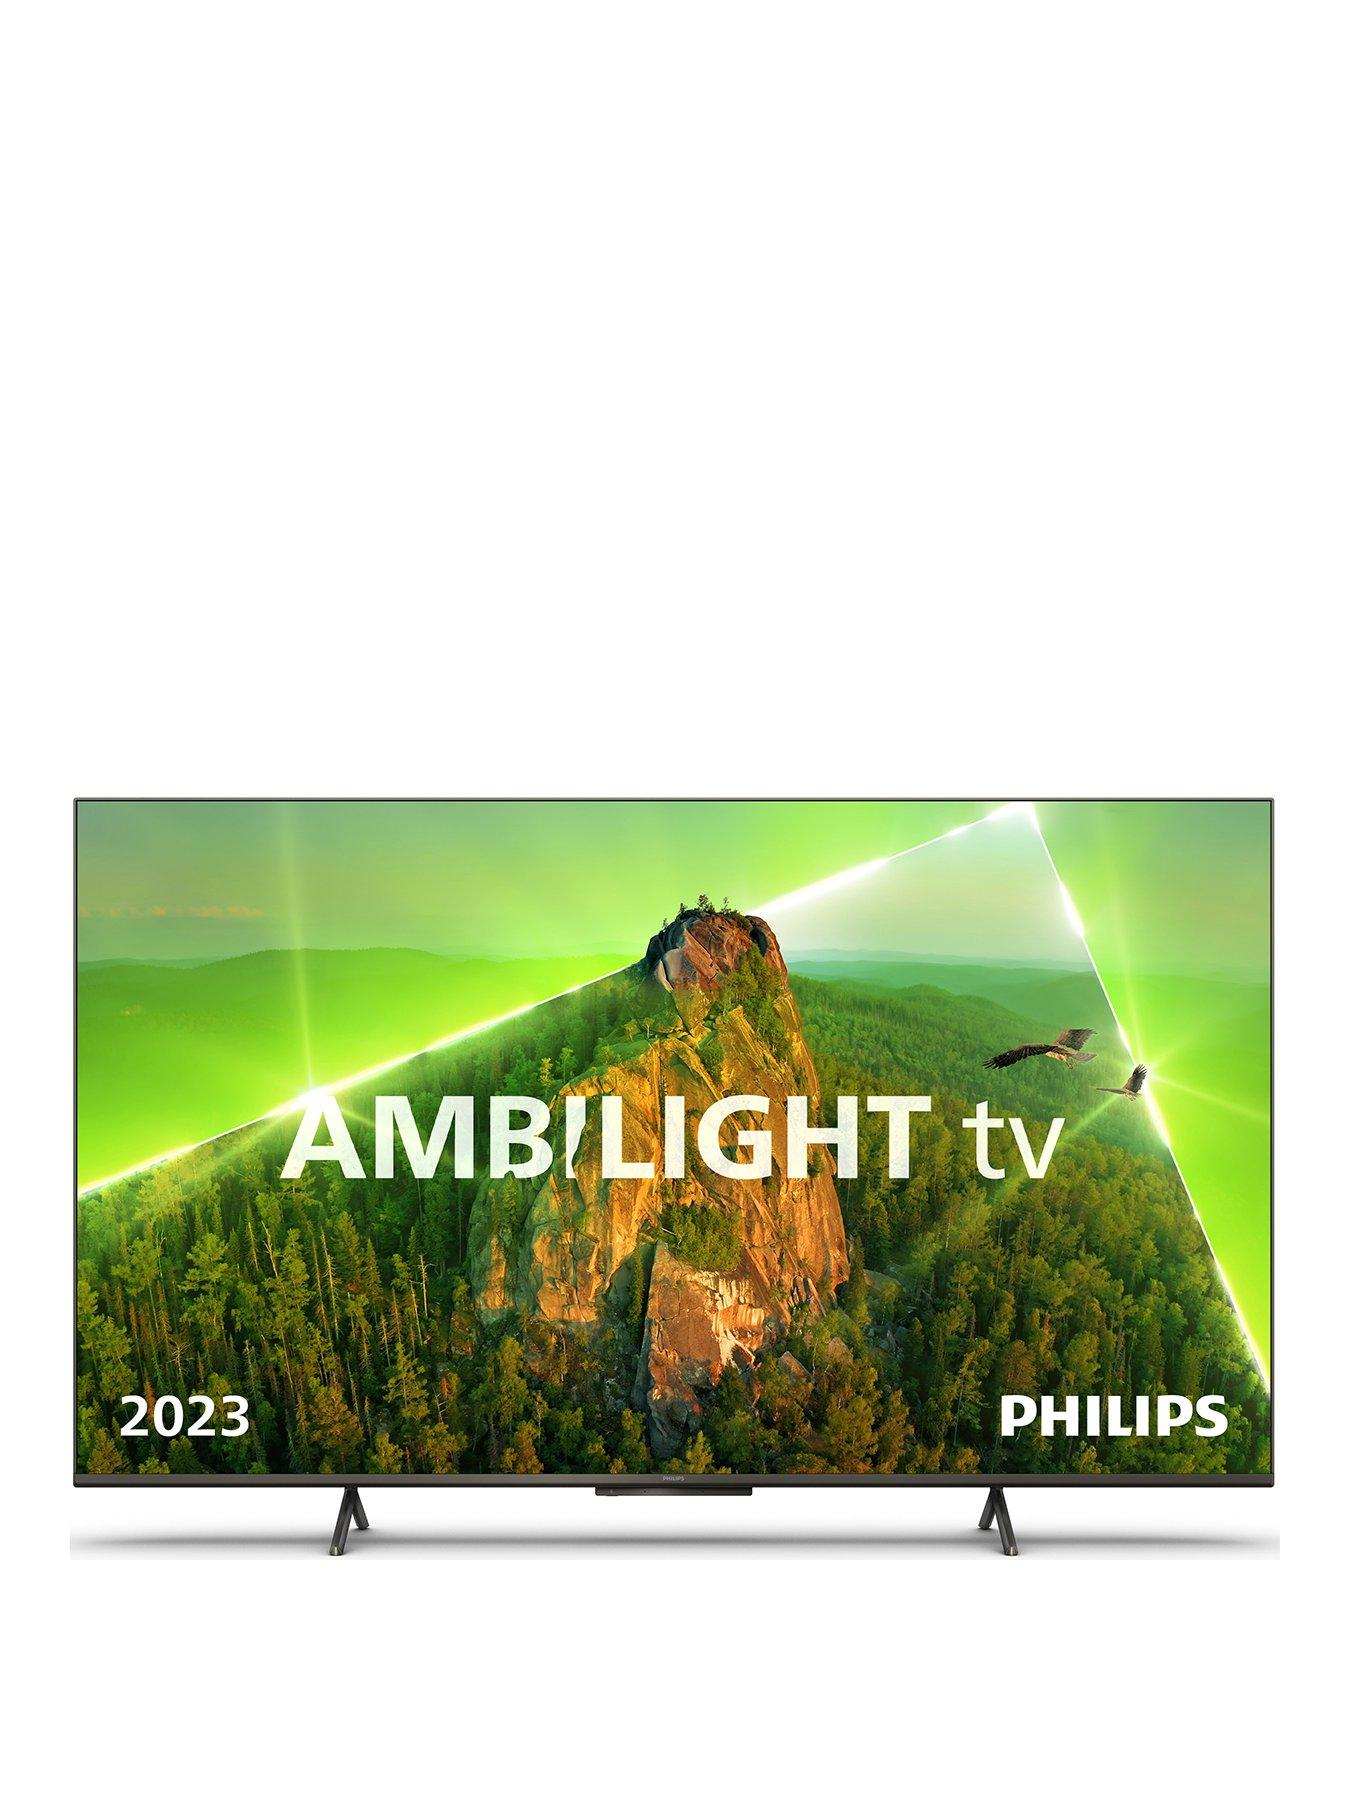 Philips Ambilight 55Pus8108/12 55-Inch Smart 4K Ultra Hd Hdr Led Tv With Amazon Alexa